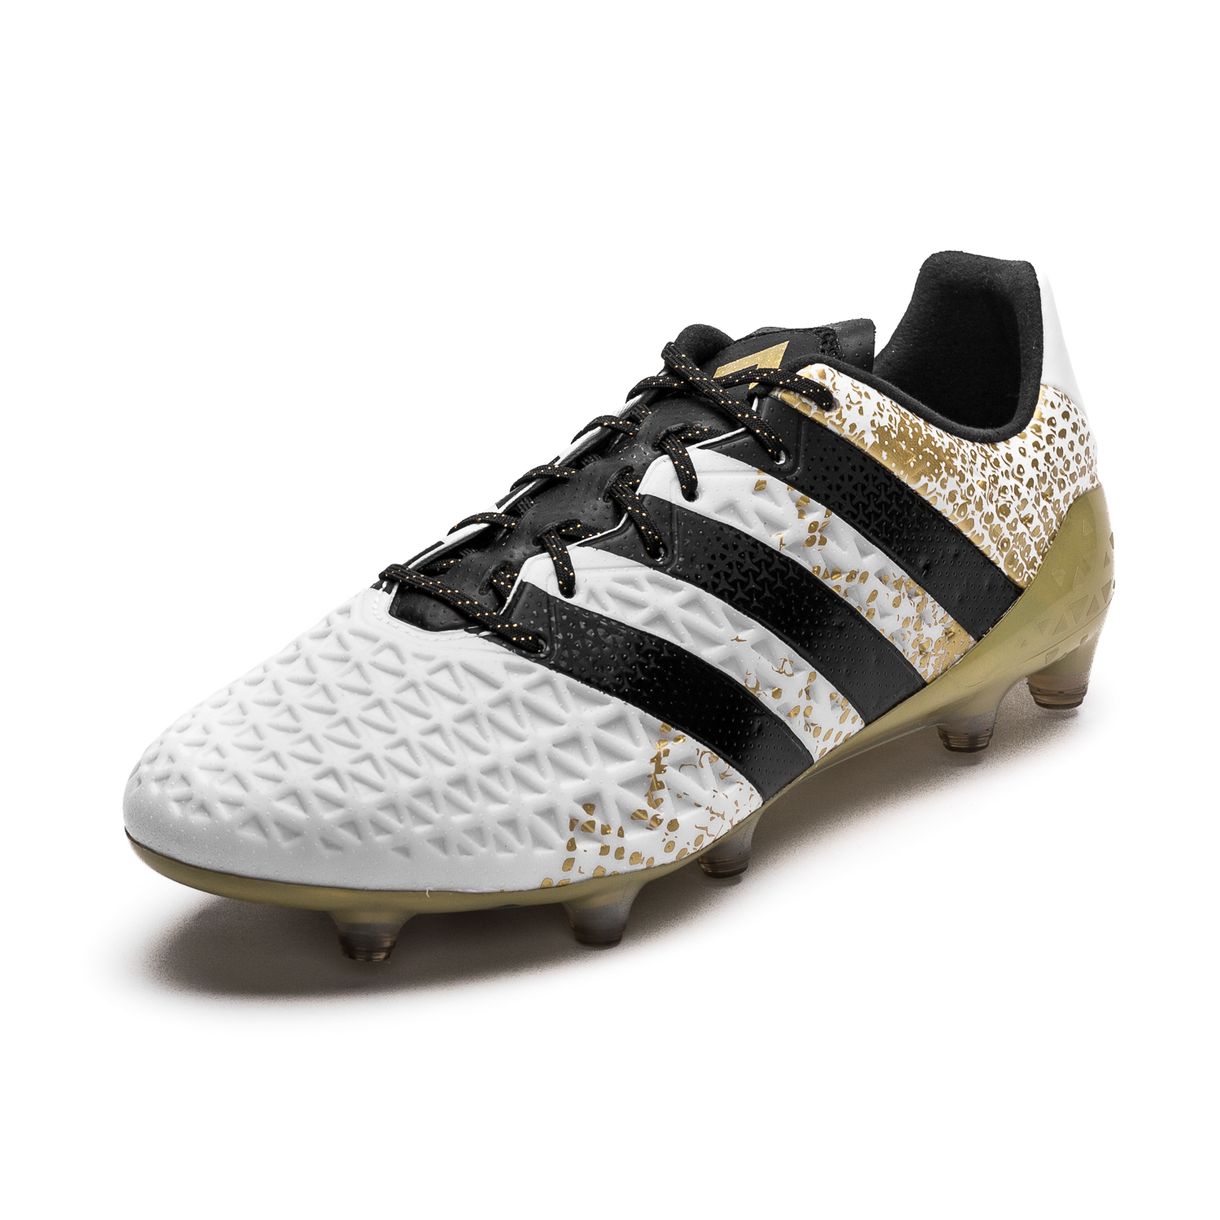 Adidas ACE 16.1 FG/AG - Stellar Pack - White / Core Black / Gold Metallic - Shirt Culture - Latest Football Kit News and More